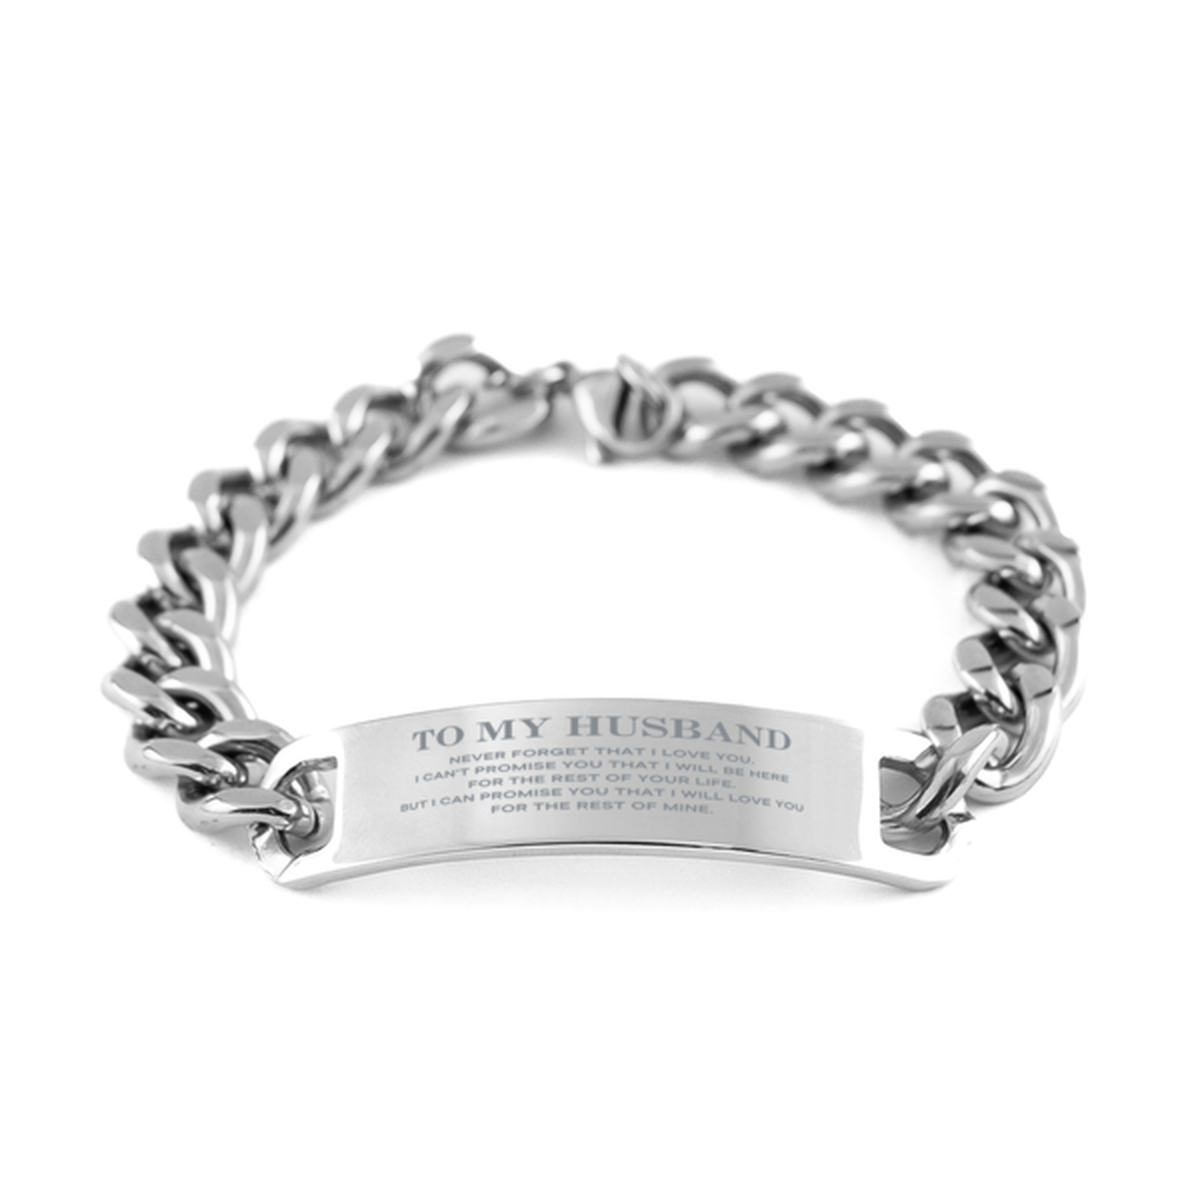 To My Husband Gifts, I will love you for the rest of mine, Love Husband Bracelet, Birthday Christmas Unique Cuban Chain Stainless Steel Bracelet For Husband